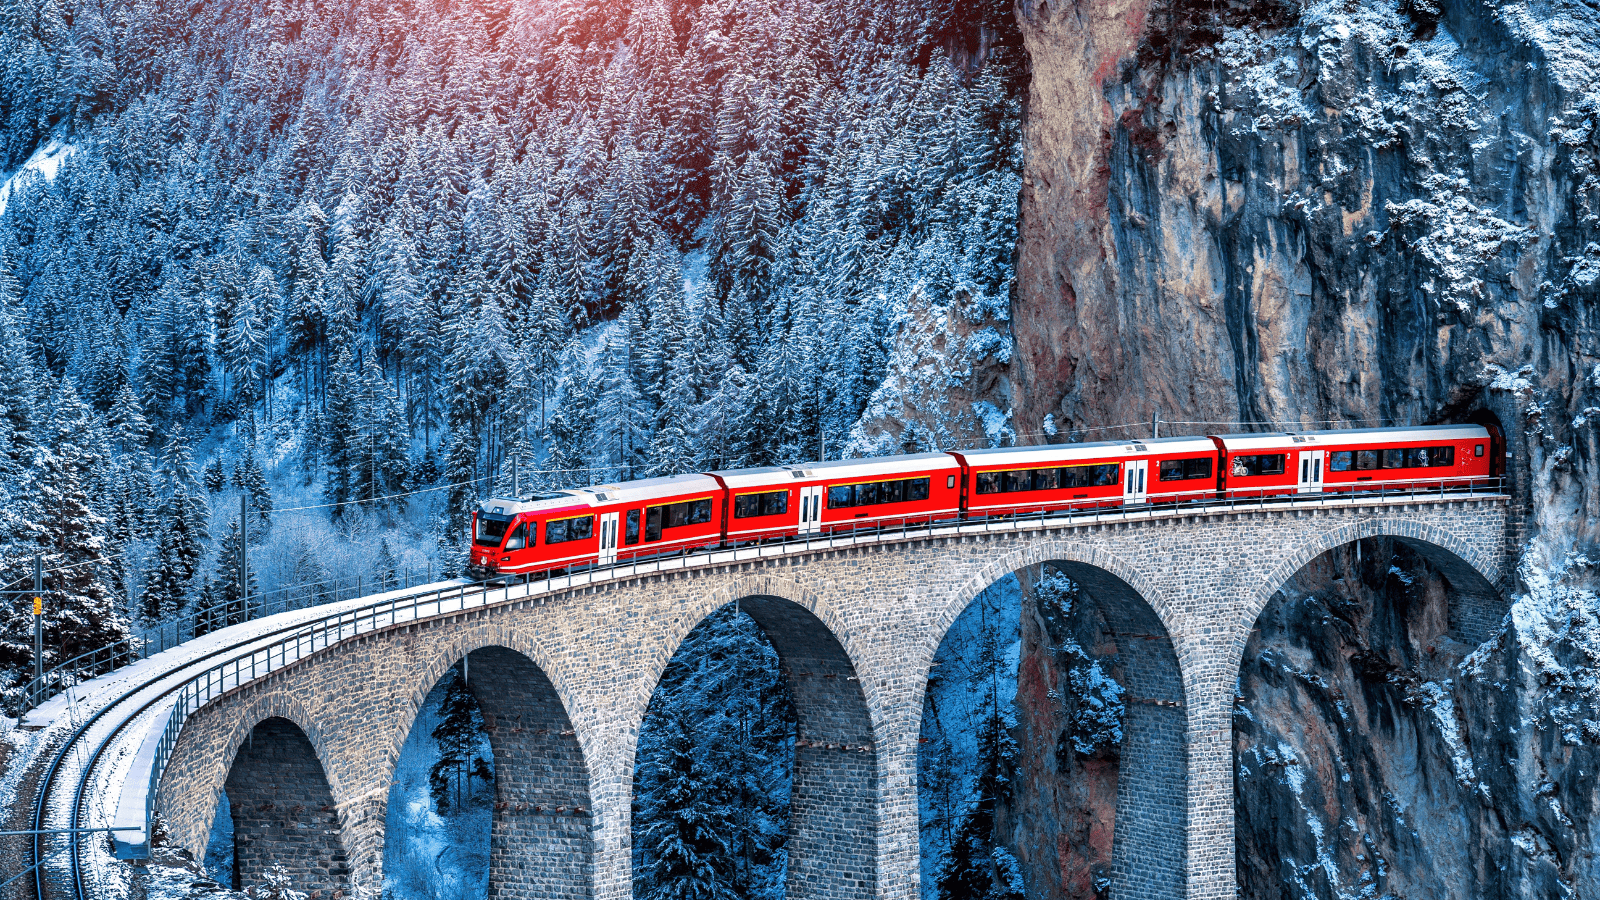 <p>The <a href="https://www.glacierexpress.ch/en/" rel="nofollow external noopener noreferrer">Glacier Express</a> route is as pretty as a postcard. This Swiss train travels between the mountain resort towns of Zermatt and <a href="https://whatthefab.com/st-moritz-summer.html" rel="follow">St. Moritz</a>. During the 8-hour-long train ride through the Alps, you can admire sweeping vistas and scenic canyons. Glacier Express is a spectacular European adventure at any time of year.</p><p>The train has seats and tables where you can enjoy food and drinks. Glacier Express is renowned for its culinary offerings. You can choose a single dish or a four-course feast, depending on your budget. </p>